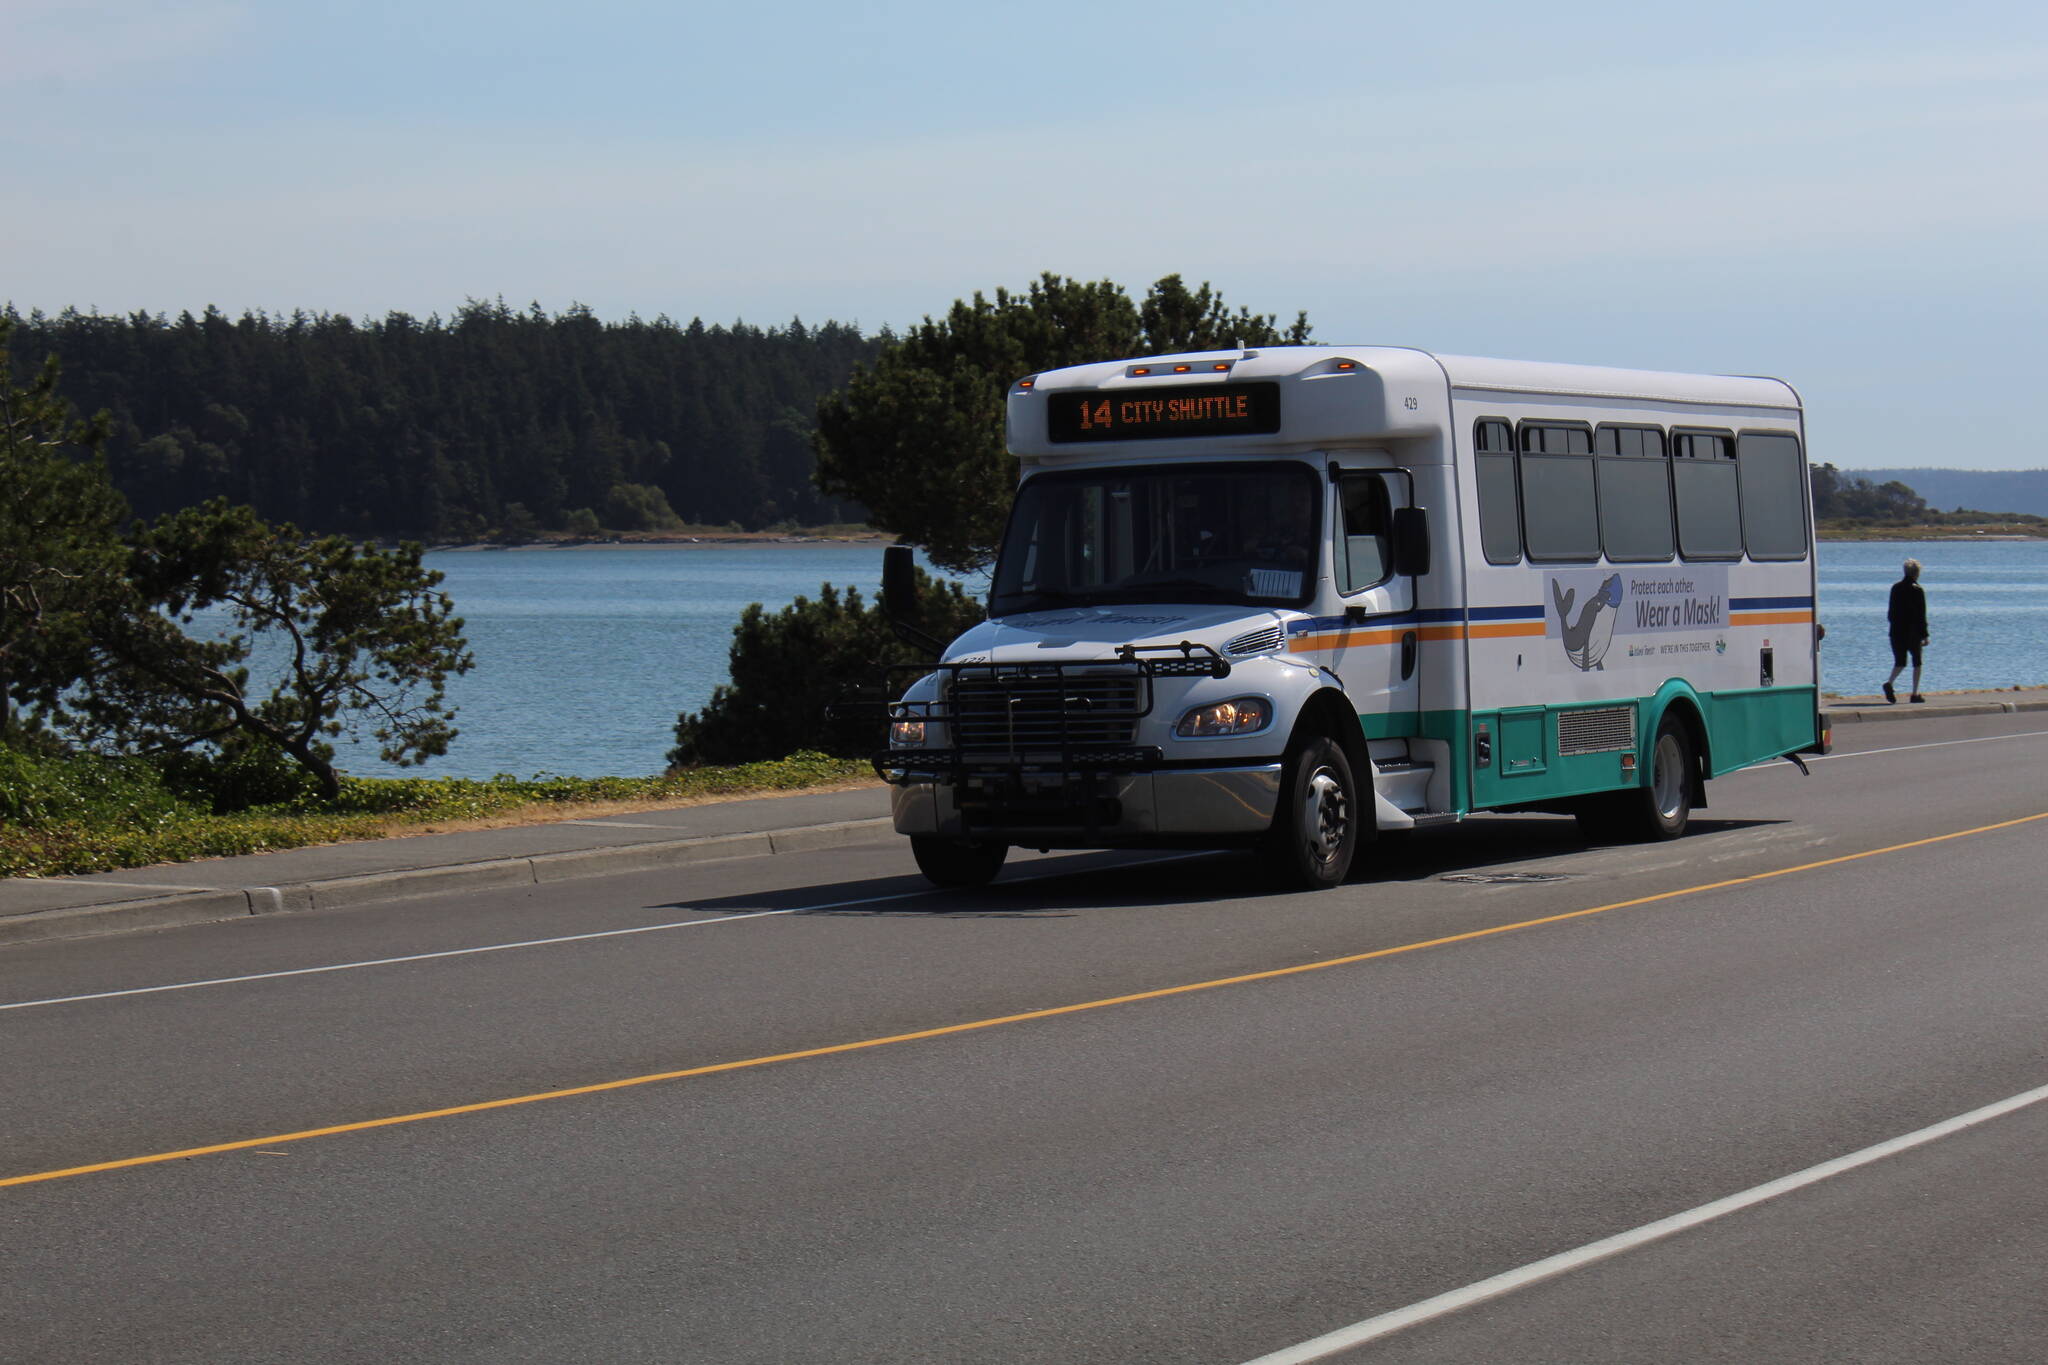 Photo by Karina Andrew/Whidbey News-Times
An Oak Harbor city shuttle drives down Bayshore Drive. Route 14 will be replaced by Routes 2 and 10 beginning Sept. 26.